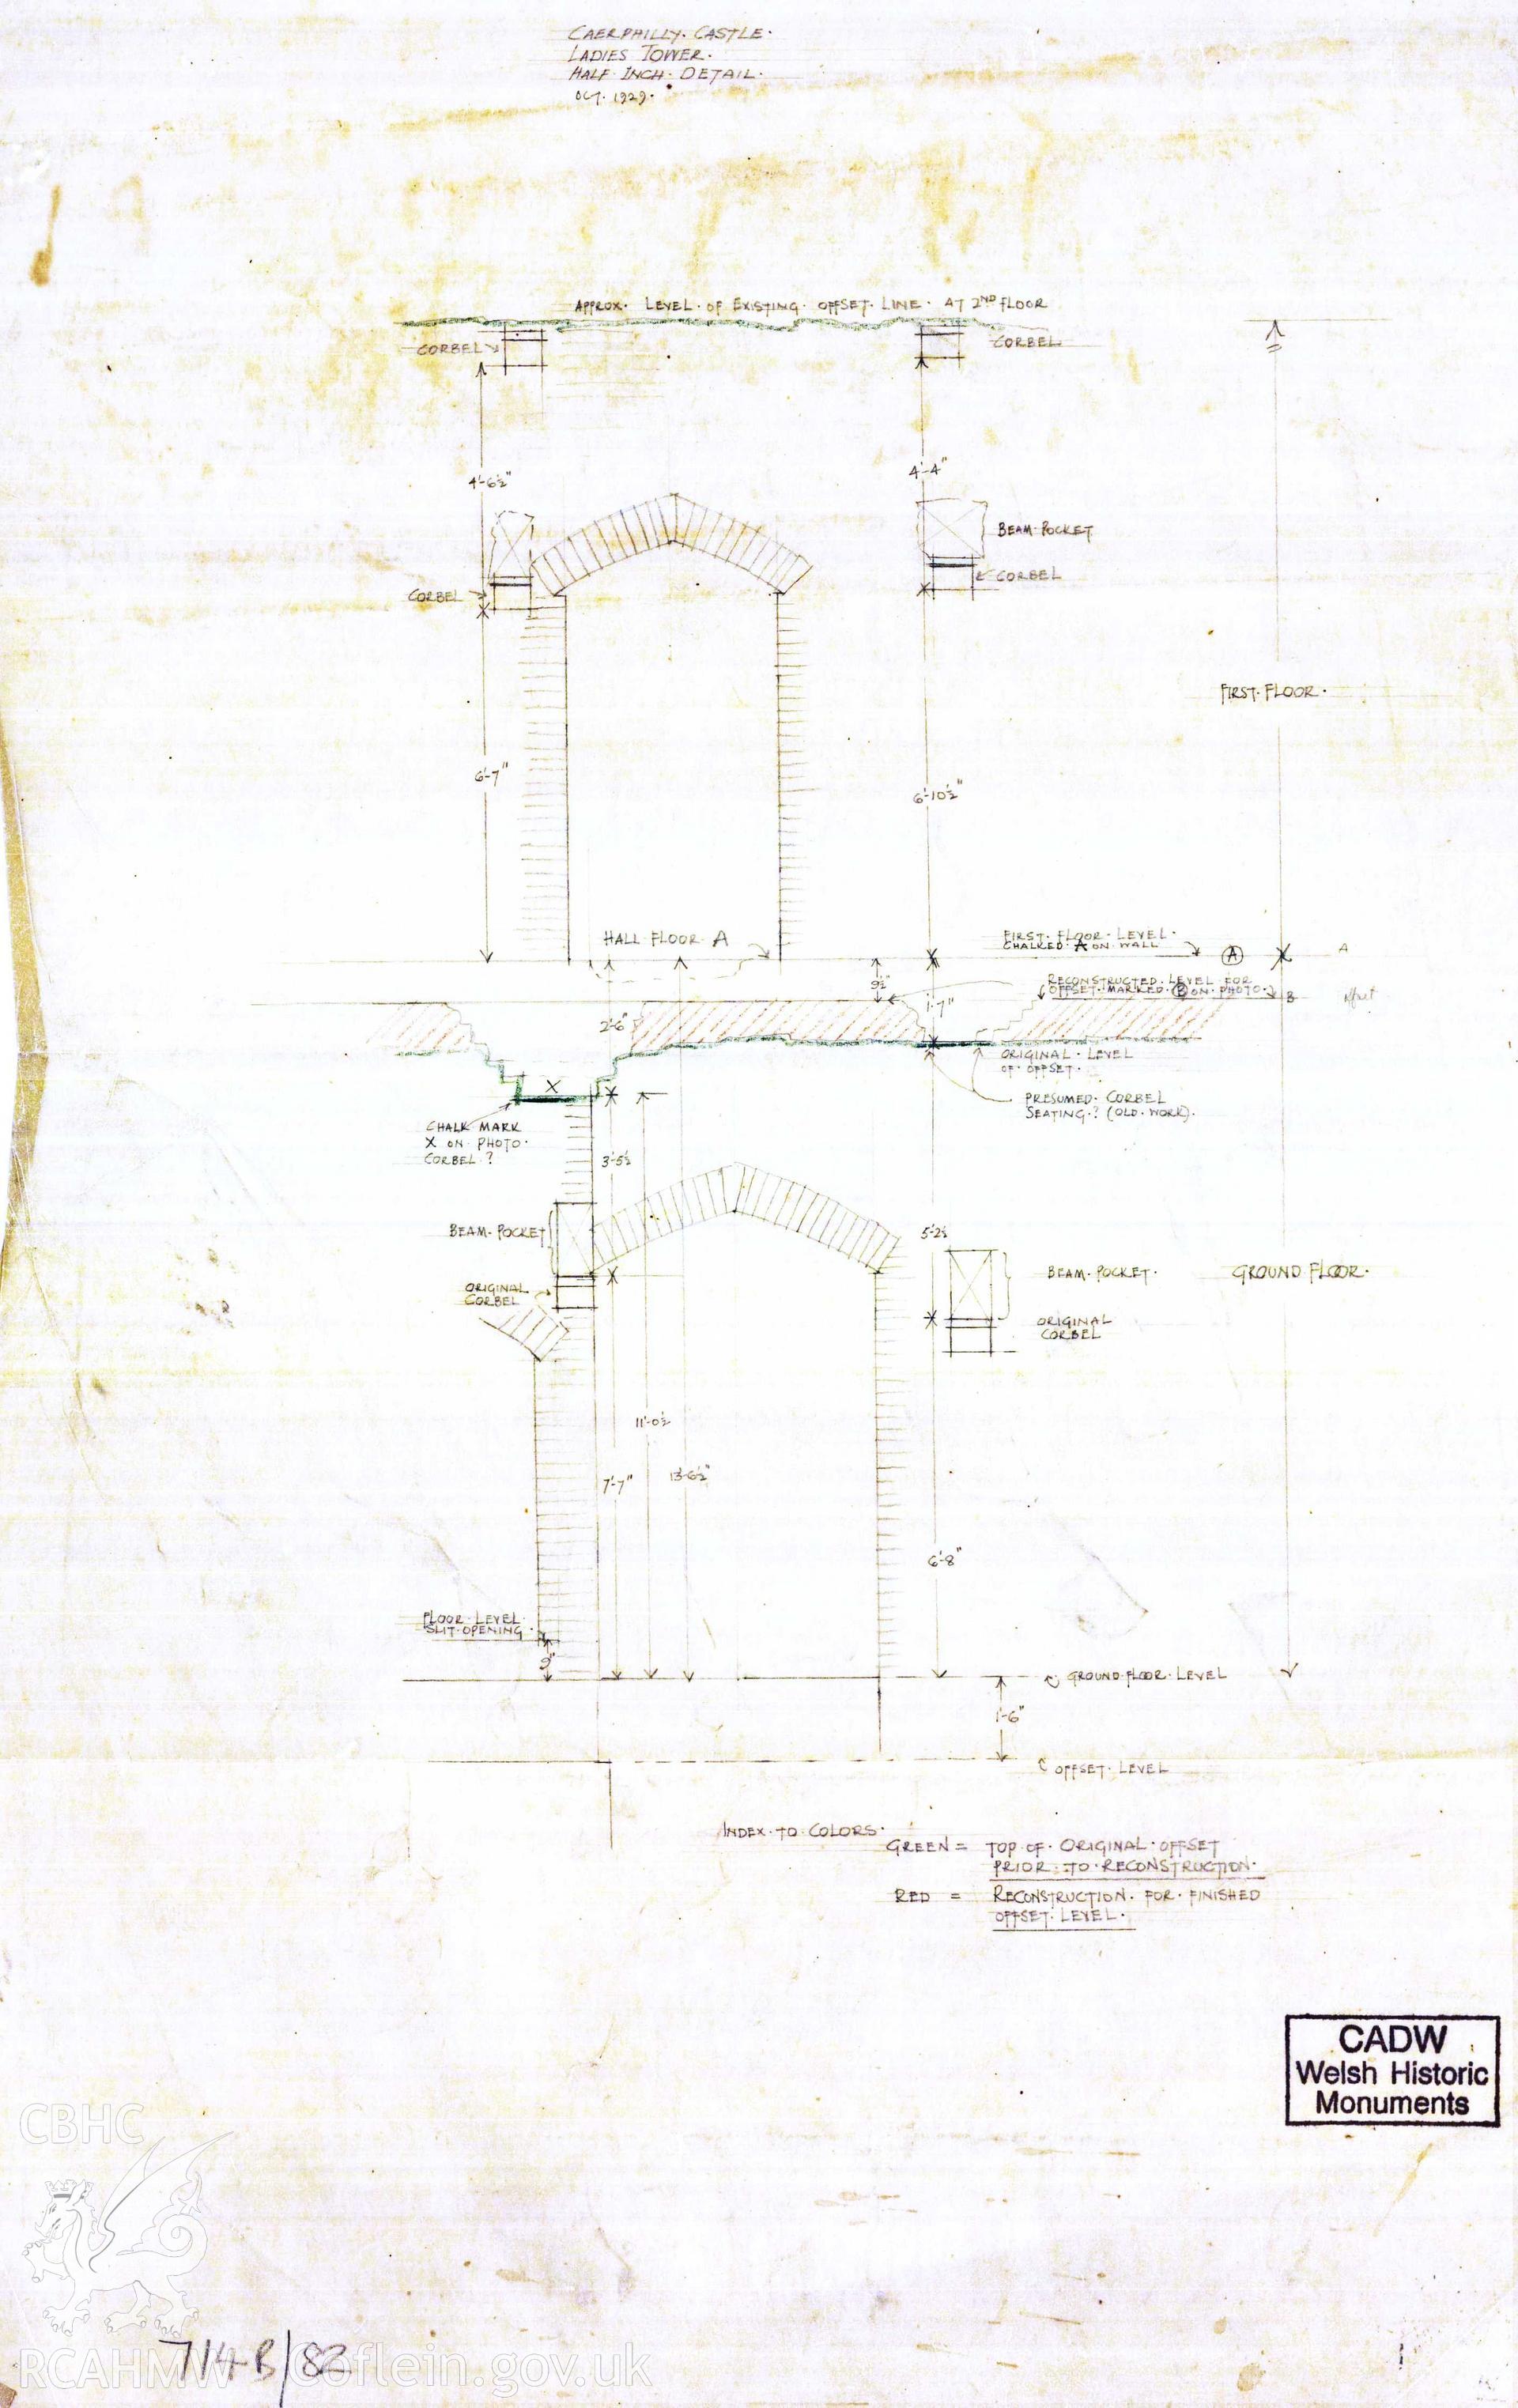 Digital copy of Cadw guardianship monument drawing of Caerphilly Castle. NW tower, gr fl+u fls/door arches. Cadw ref. no: 714B/82. Scale 1:24.  Original drawing withdrawn and returned to Cadw at their request.